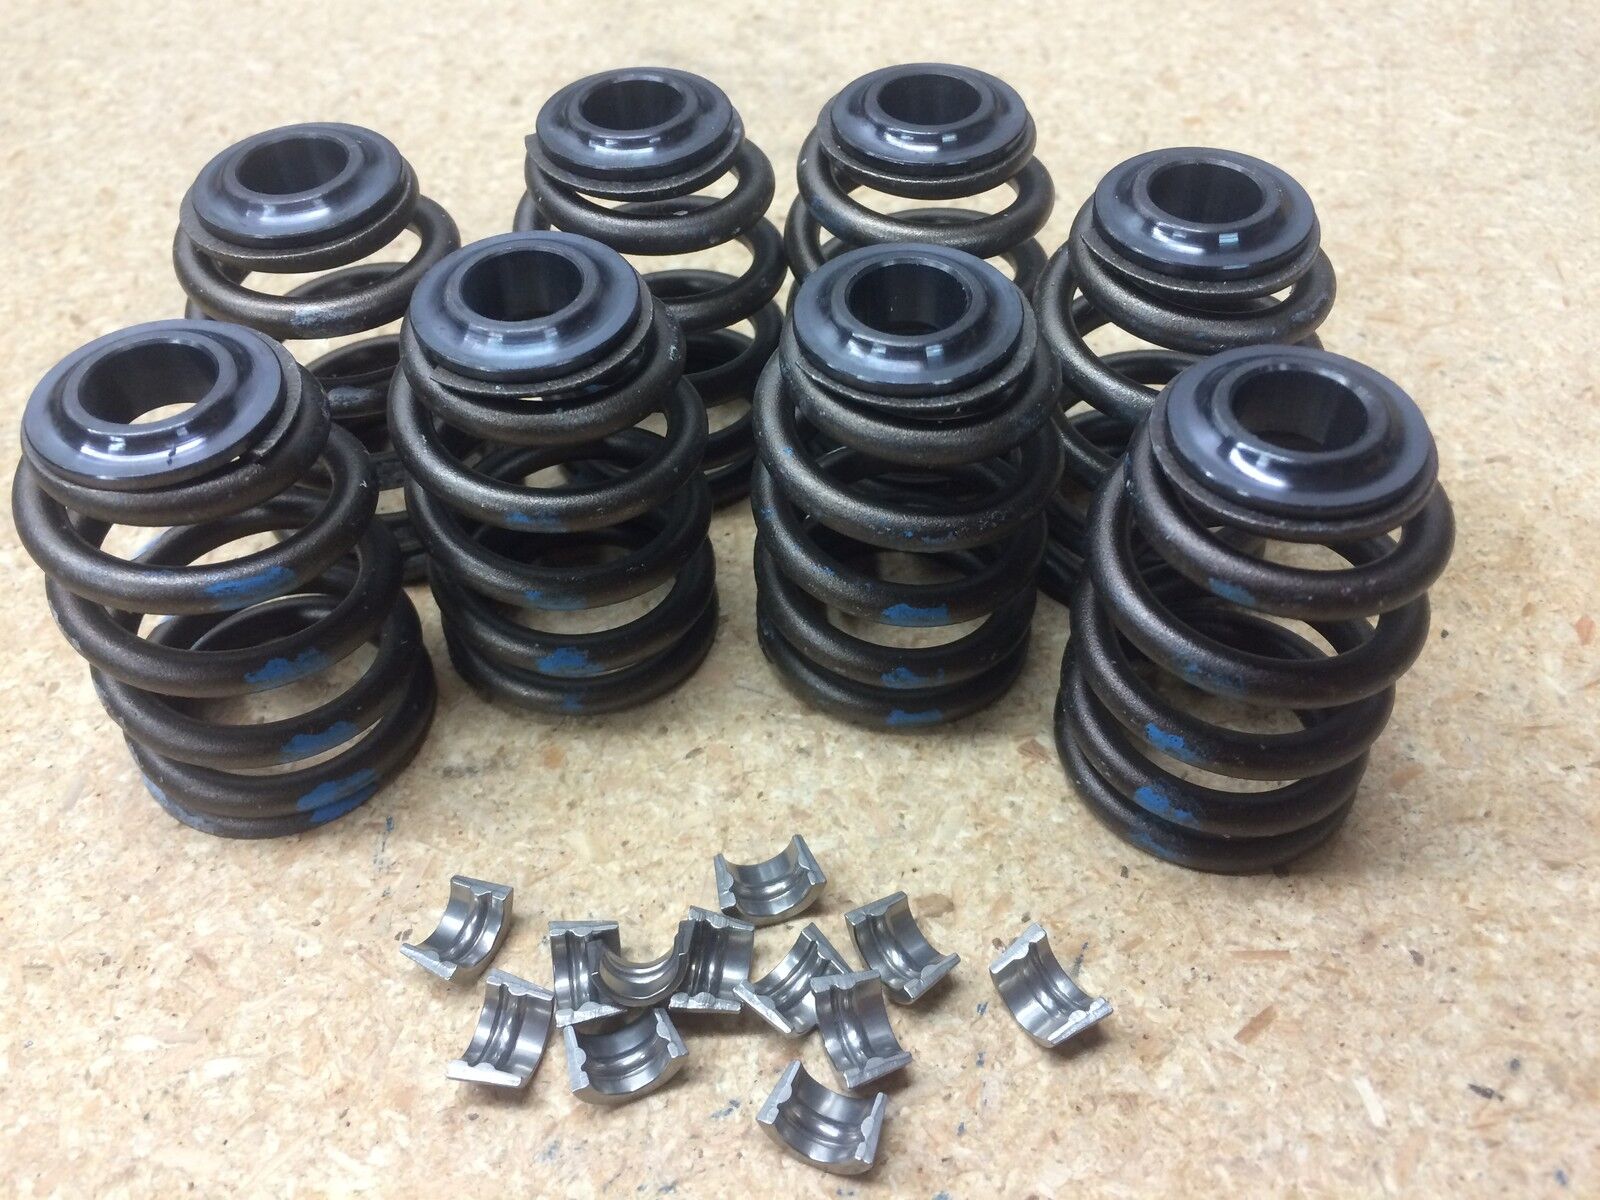 MITSUBISHI STARION CONQUEST G54B 4G54 2.6 BEEHIVE VALVE SPRINGS W/ CHROMOLY TOPS